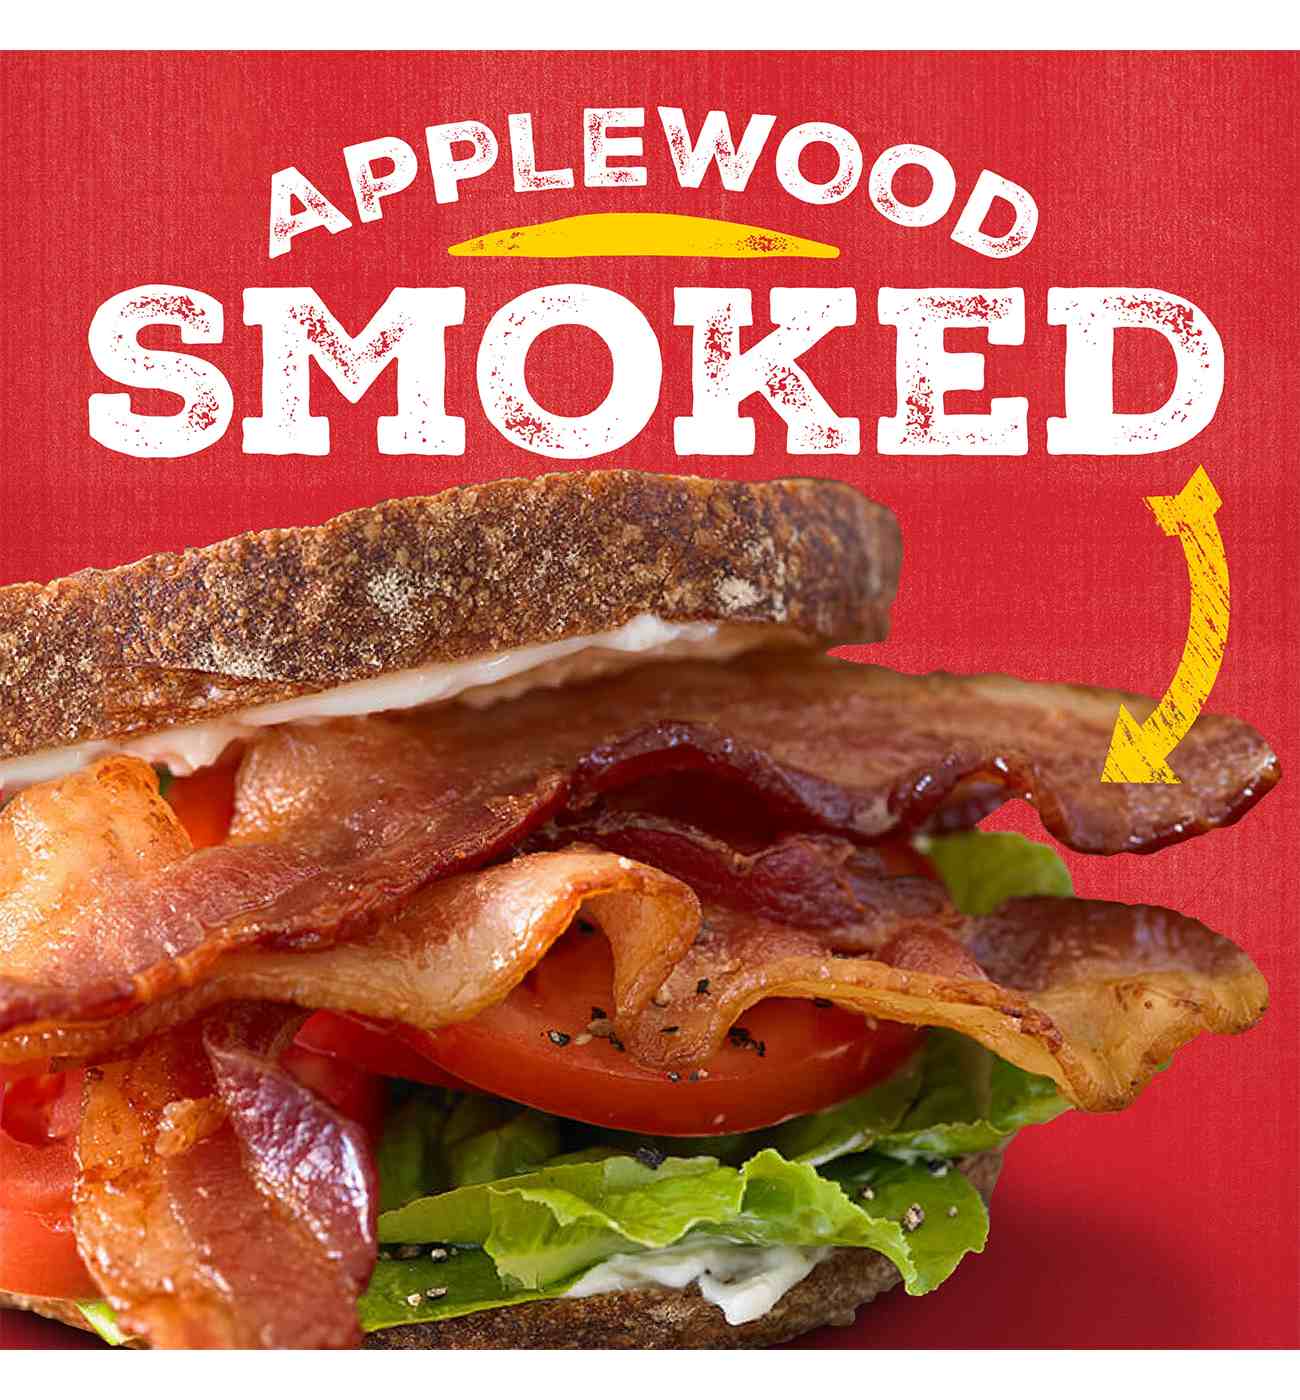 Jimmy Dean Premium Applewood Smoked Bacon; image 4 of 6